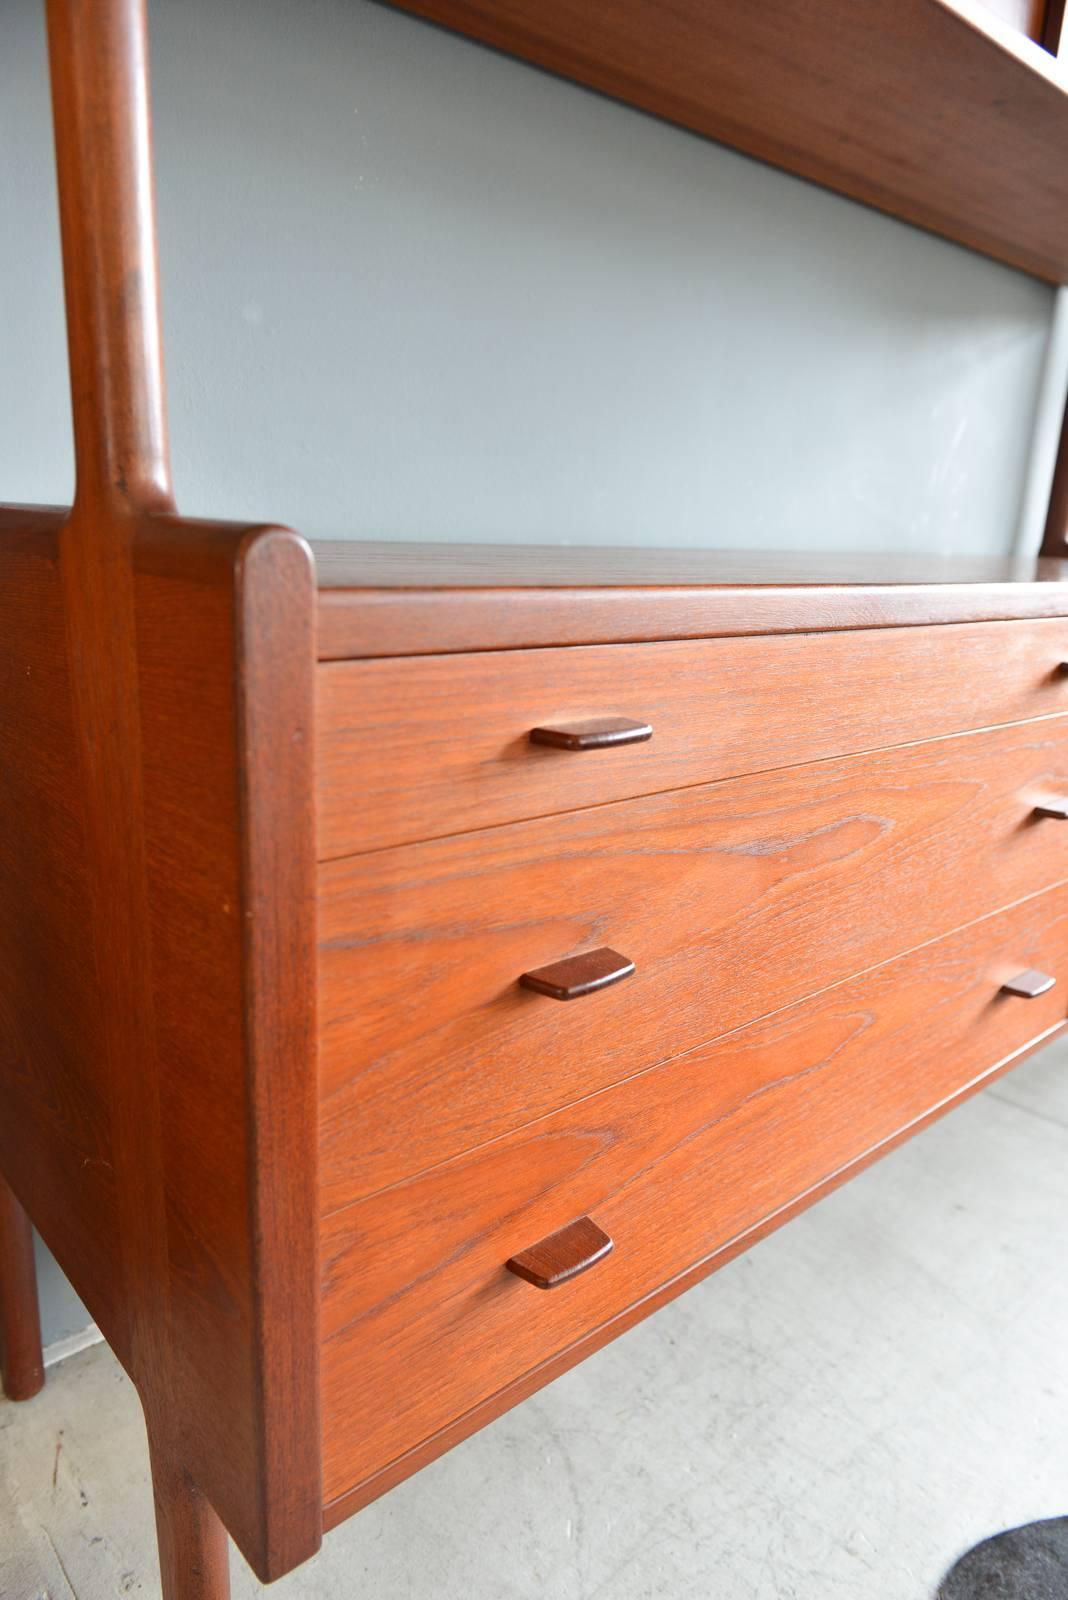 Hans Wegner Model 20 teak credenza or buffet, circa 1960. Mfg. by RY Möbler, marked on back and in excellent vintage condition with no chips or scratches. Original adjustable inner birch shelving and felt lined upper drawer. Classic lines and